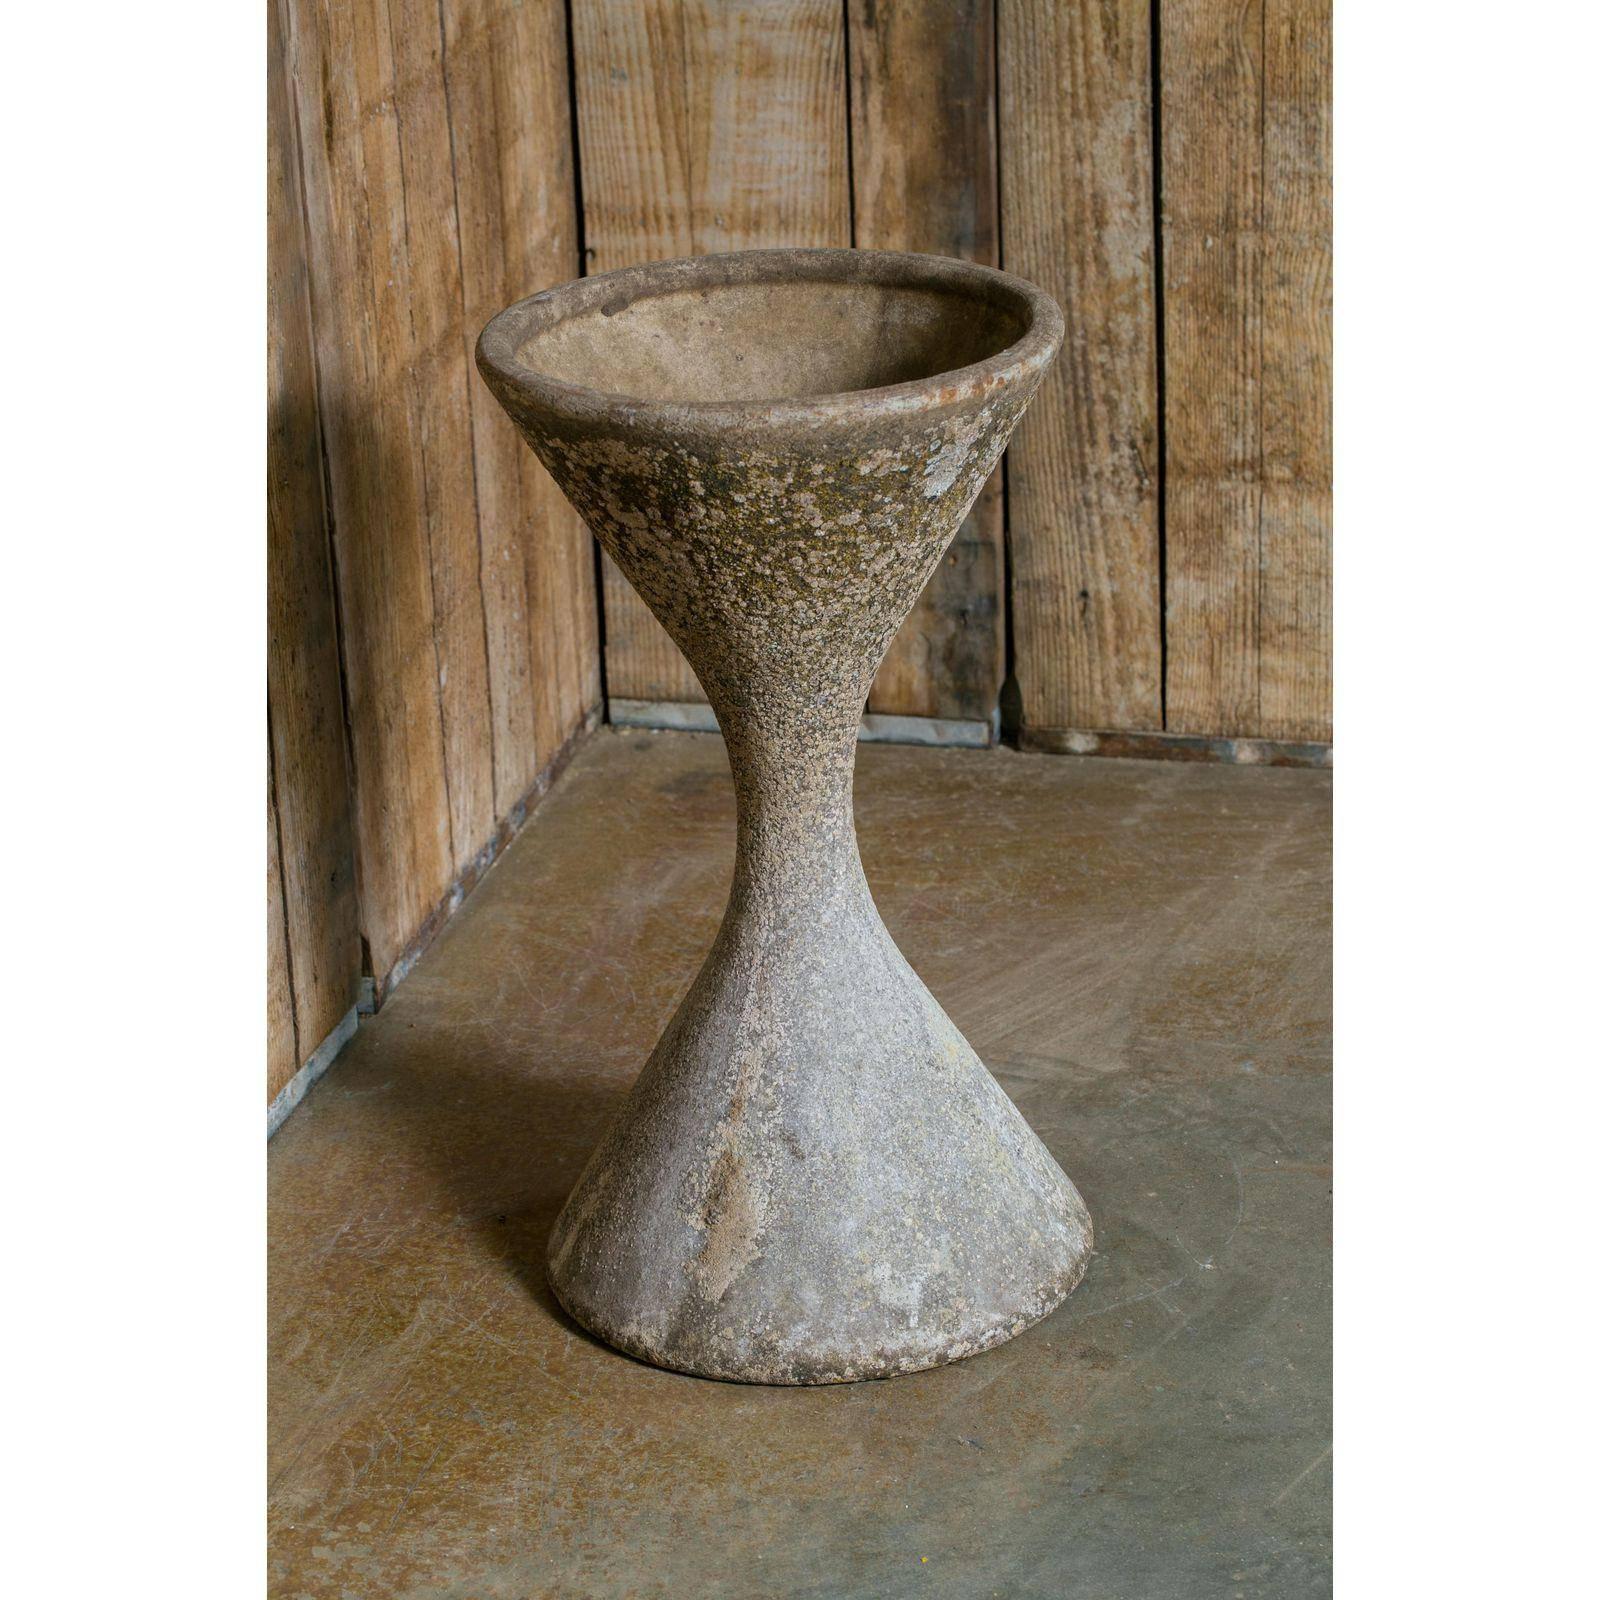 Wonderful vintage Willy Guhl spindle or diablo style planter from Swiss company Eternit Ag, circa 1950s. Dappled dark grey coloring, constructed of fiber cement. Great Mid-Century Modern hourglass geometric design. Stamped with serial number inside